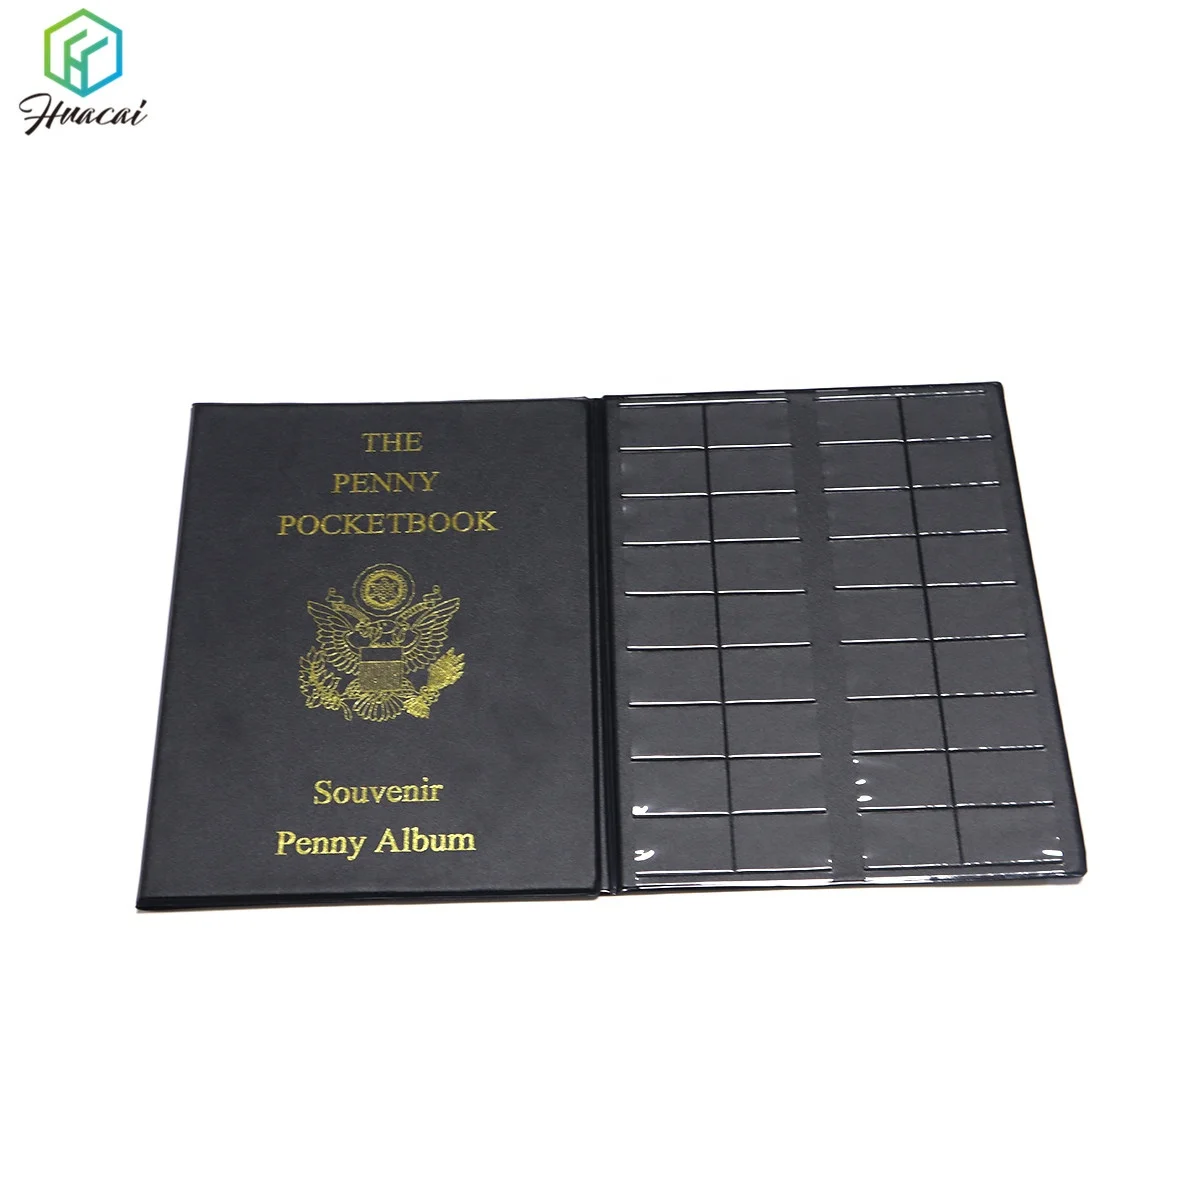 5 Penny Passport Souvenir Elongated Coin Albums With Free Pressed Pennies